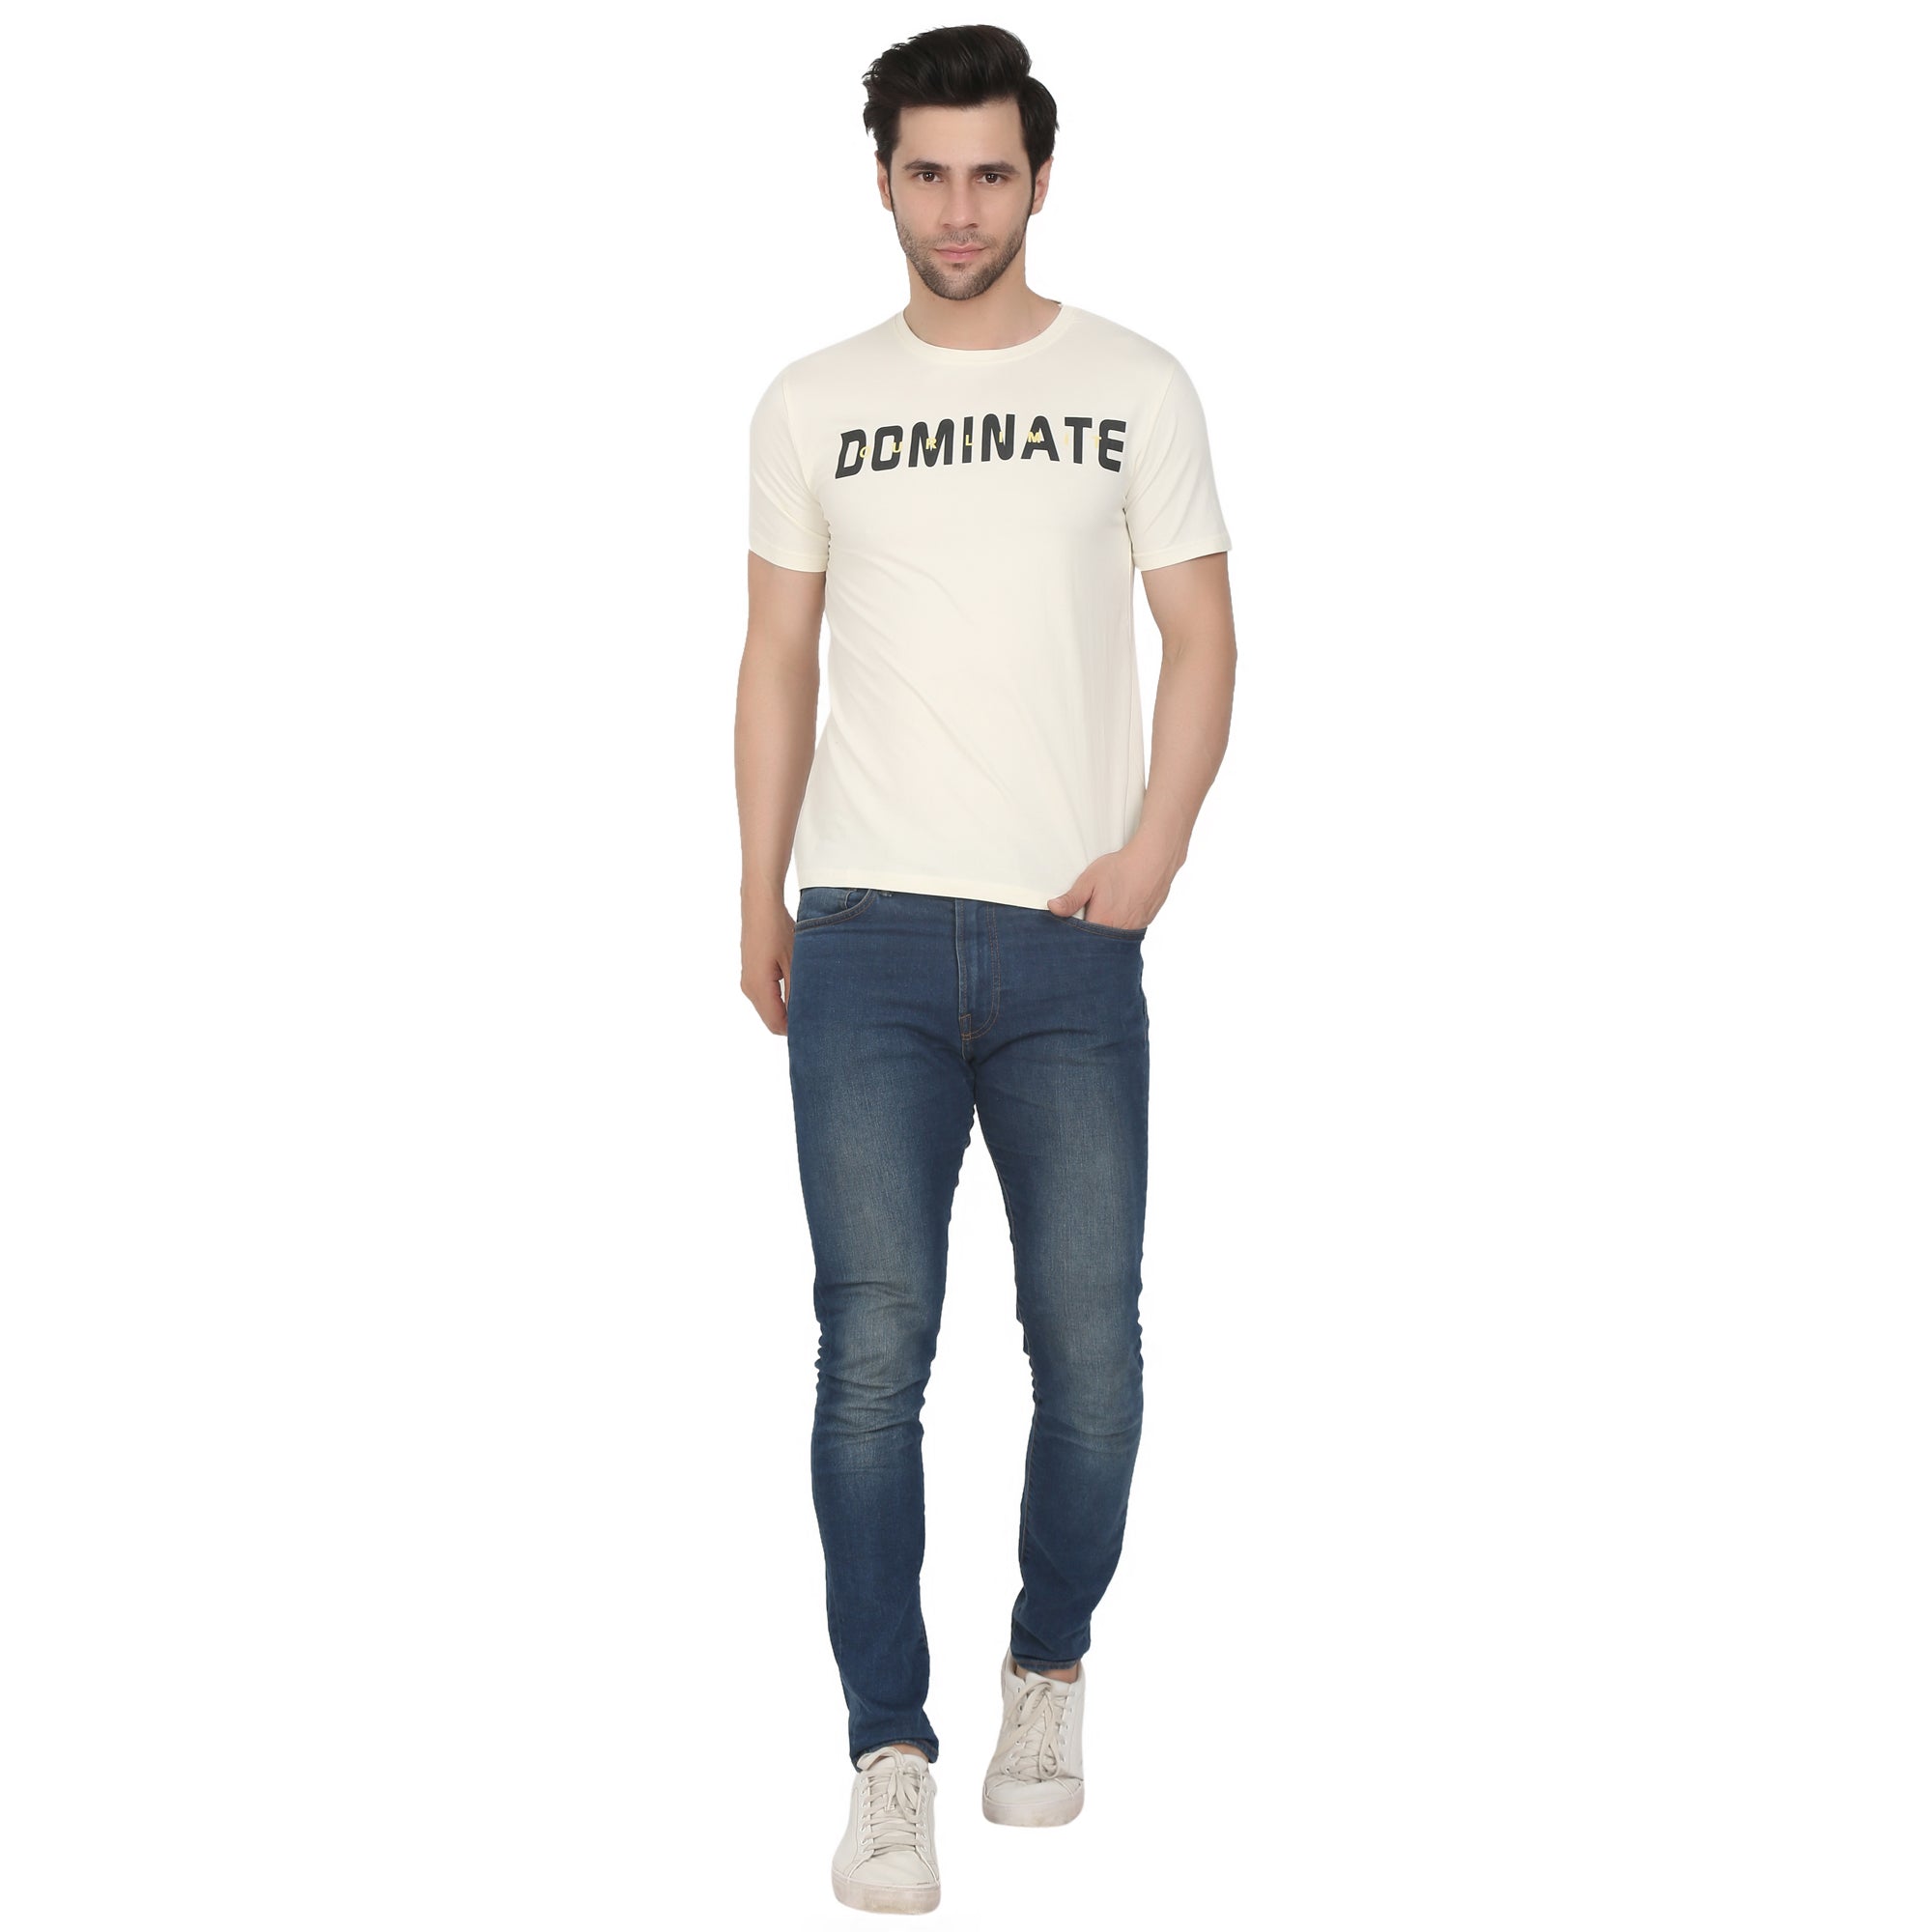 Men Four Way Stretch Cool Cotton Printed T-shirt - Off White Colour